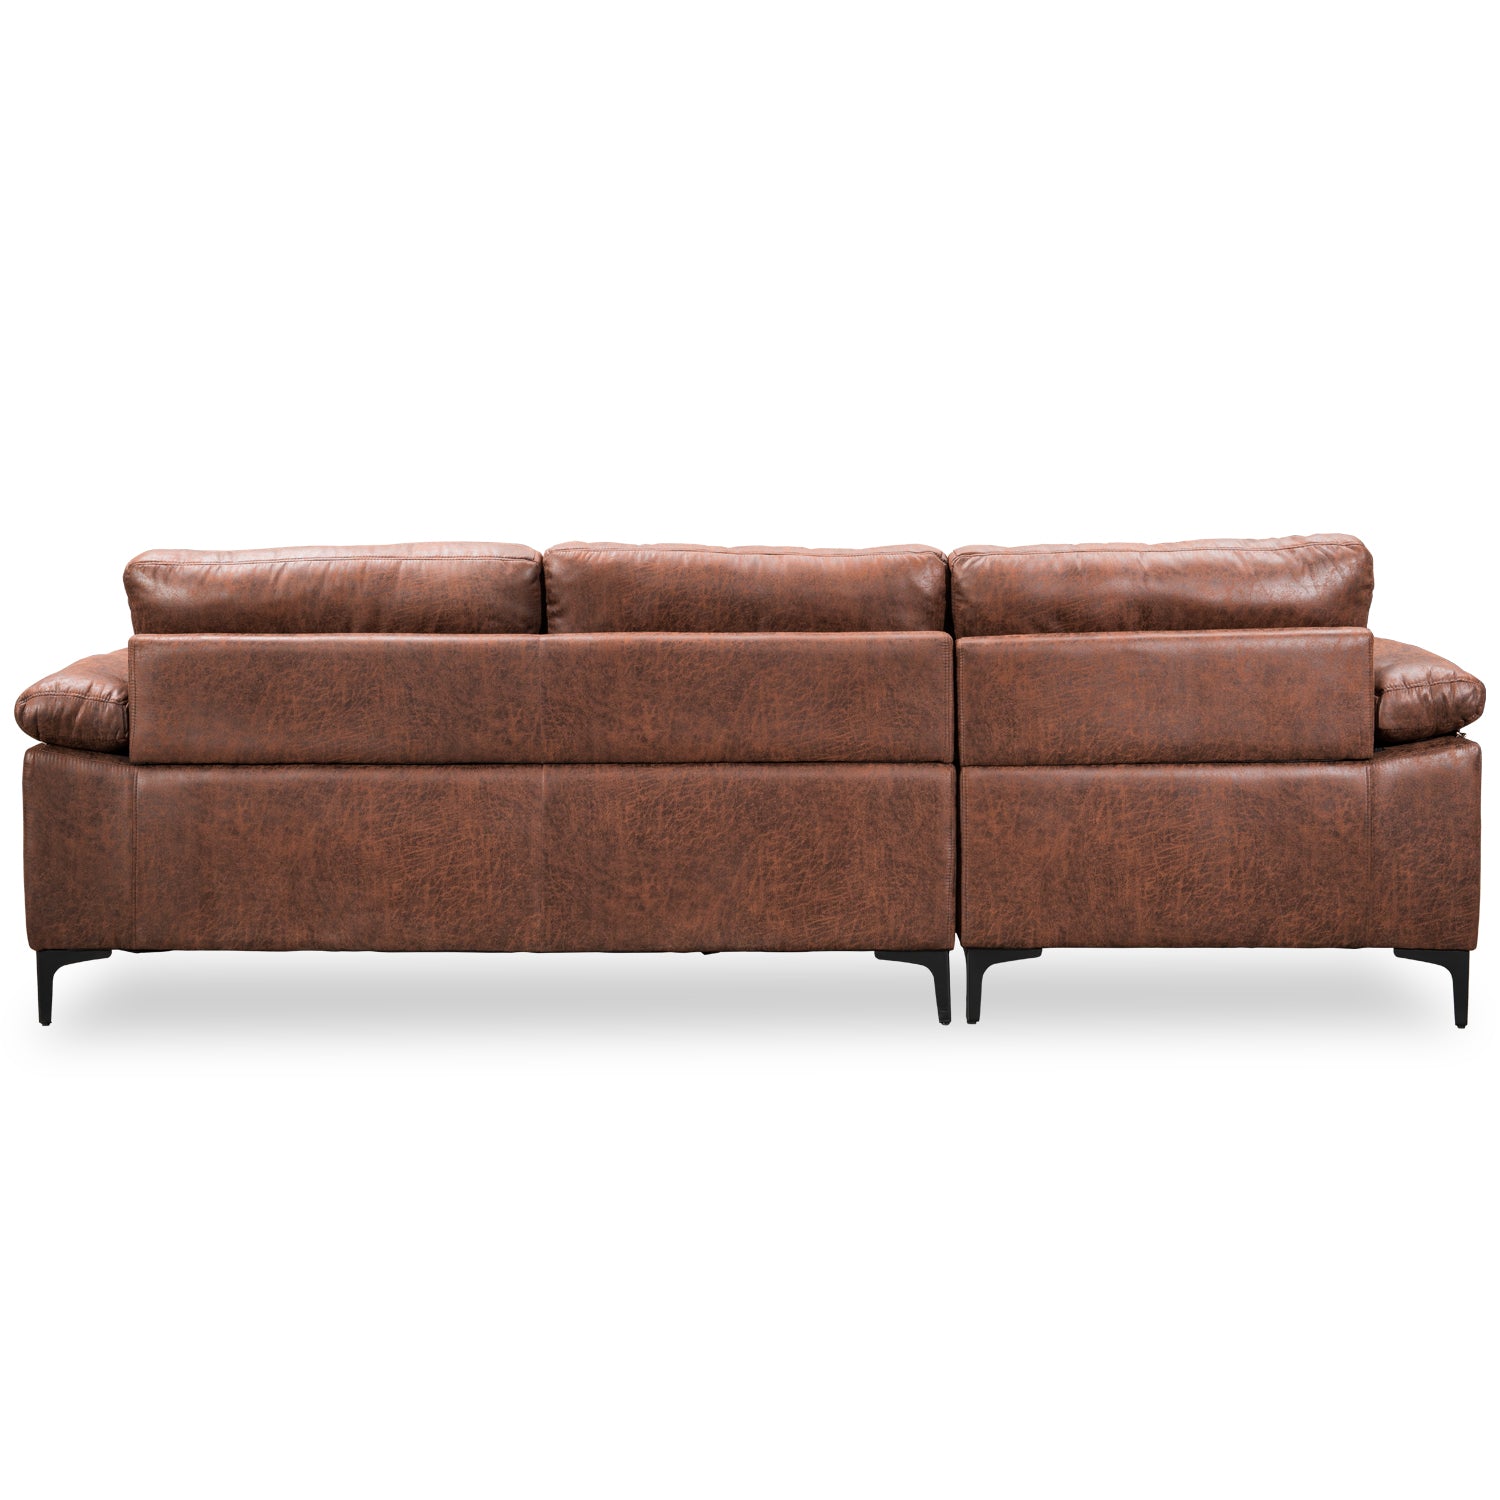 Ovios Living Room Reversible Sofa Chaise 100.40" Wide with Ottoman